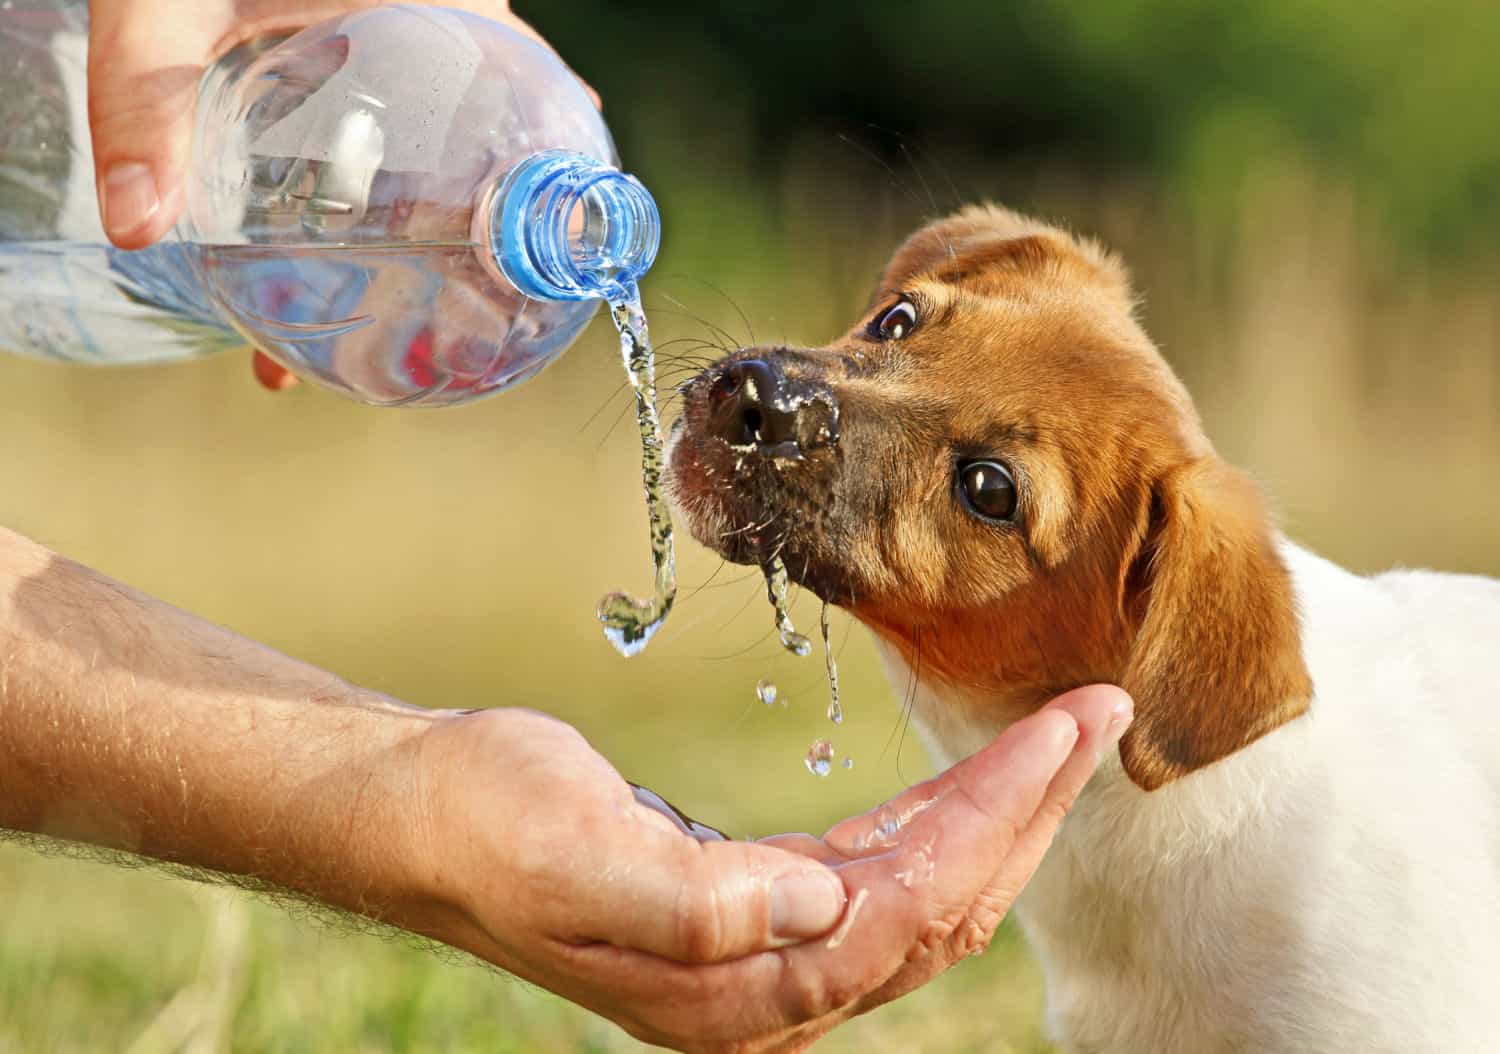 A puppy drinking water from a bottle